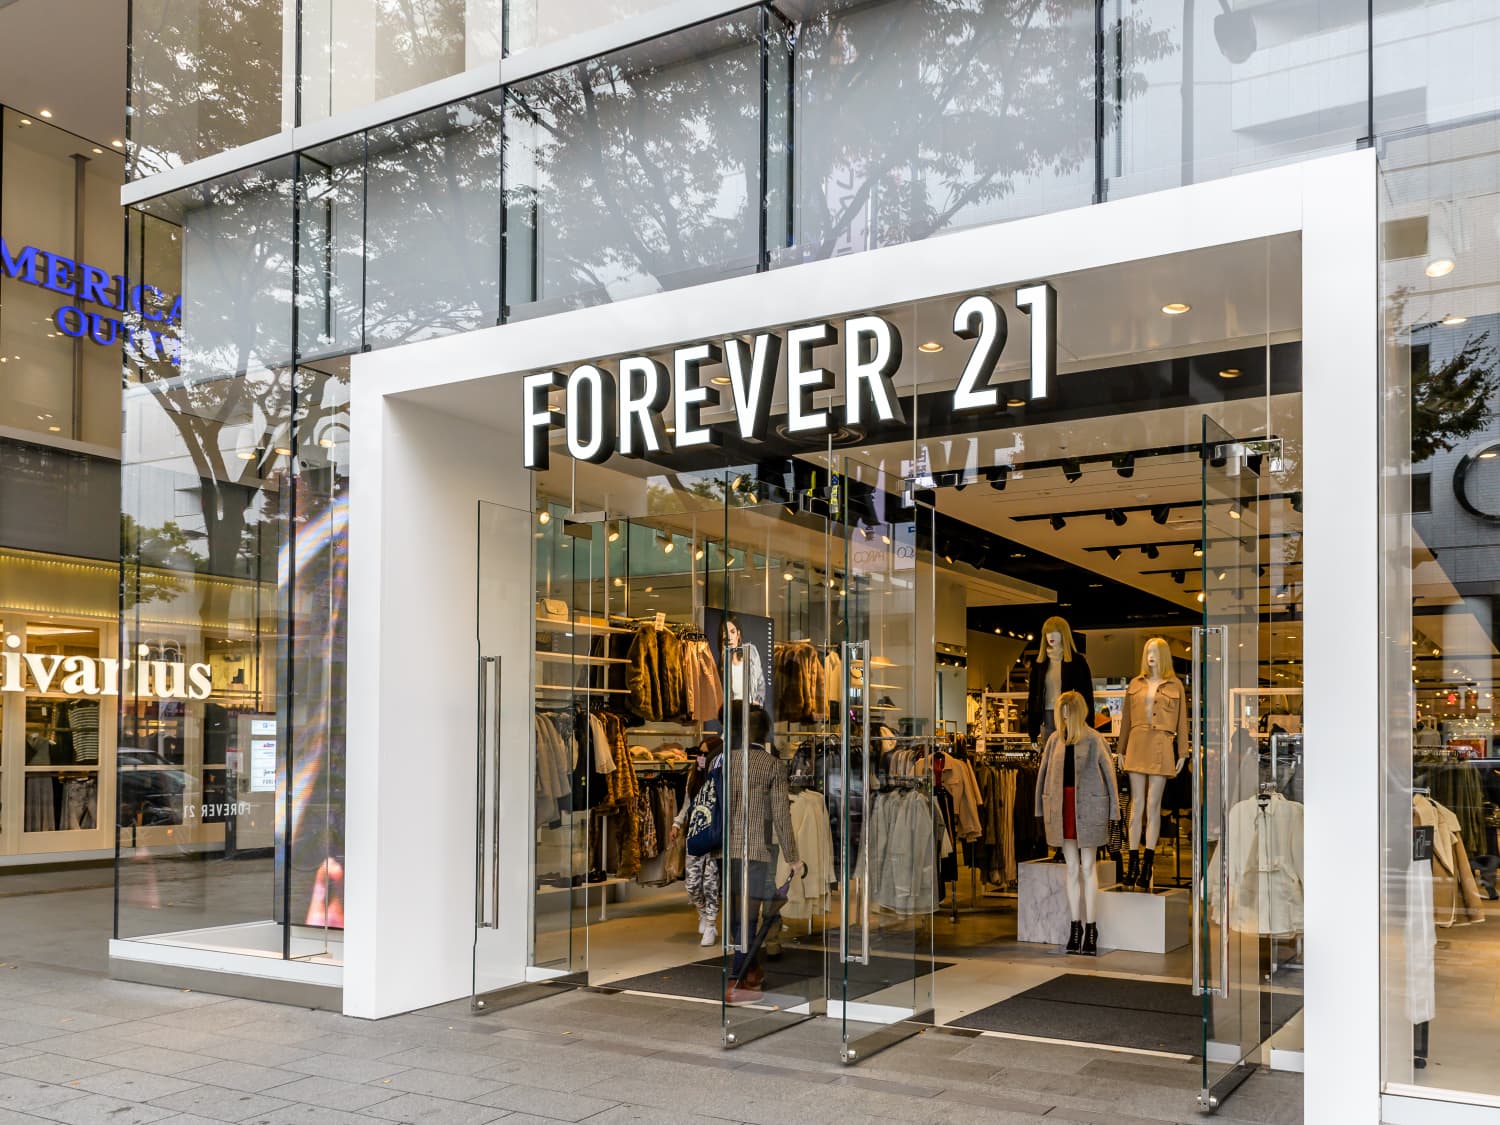 A Complete Guide To Check The Balance On Forever 21 Gift Card